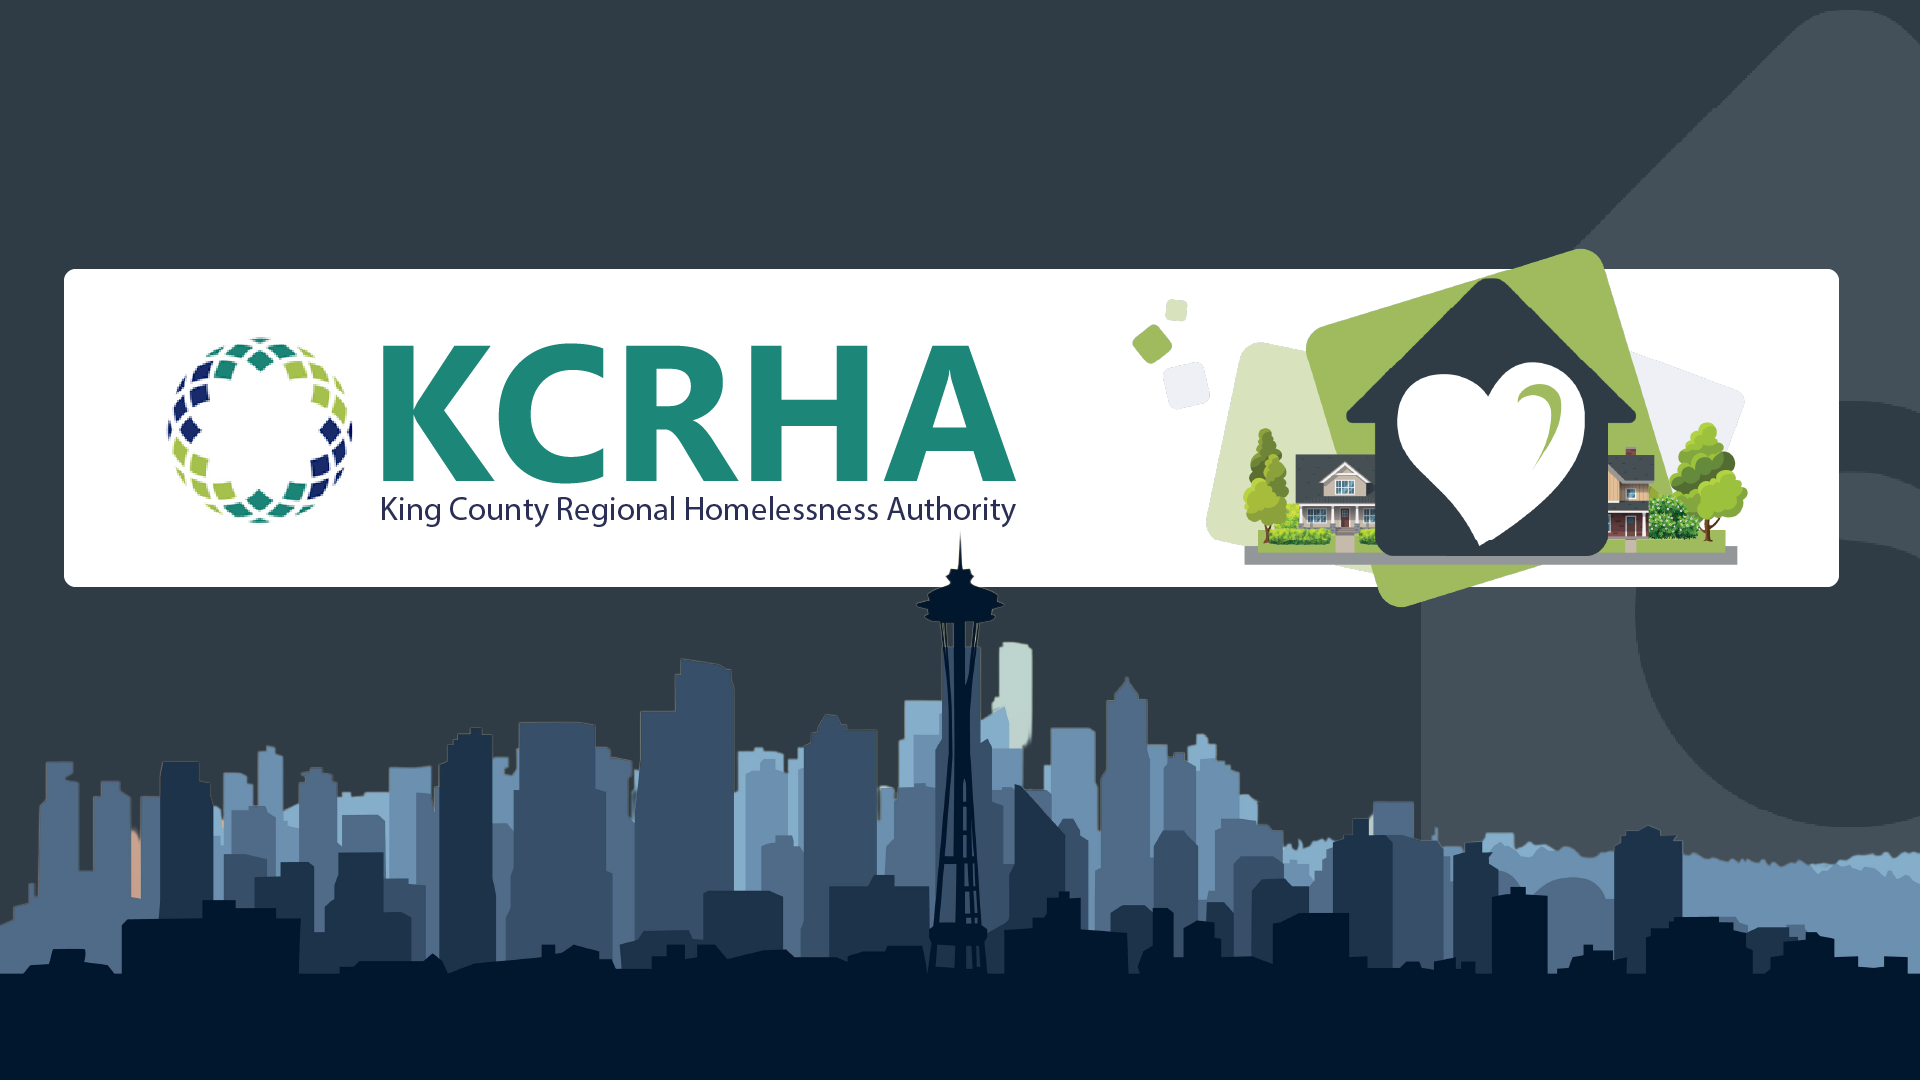 Property Inspect partners with King County Regional Homelessness Authority to end homelessness in the Greater Seattle region